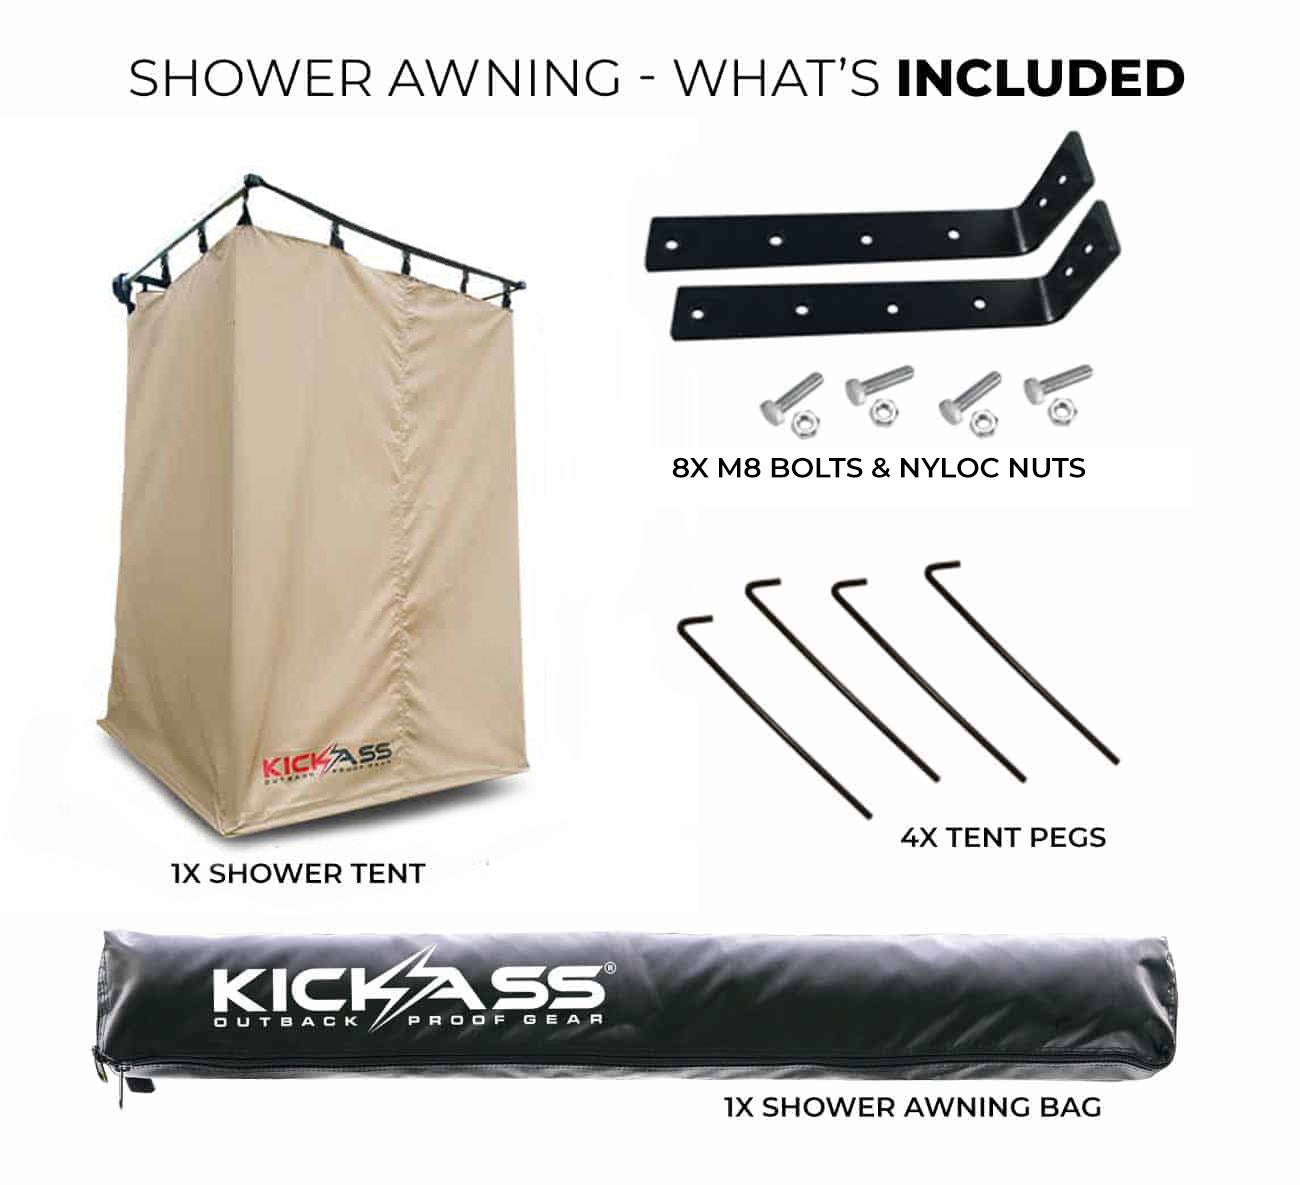 KickAss Car Roof Awning with Shower Tent and Base Bundle